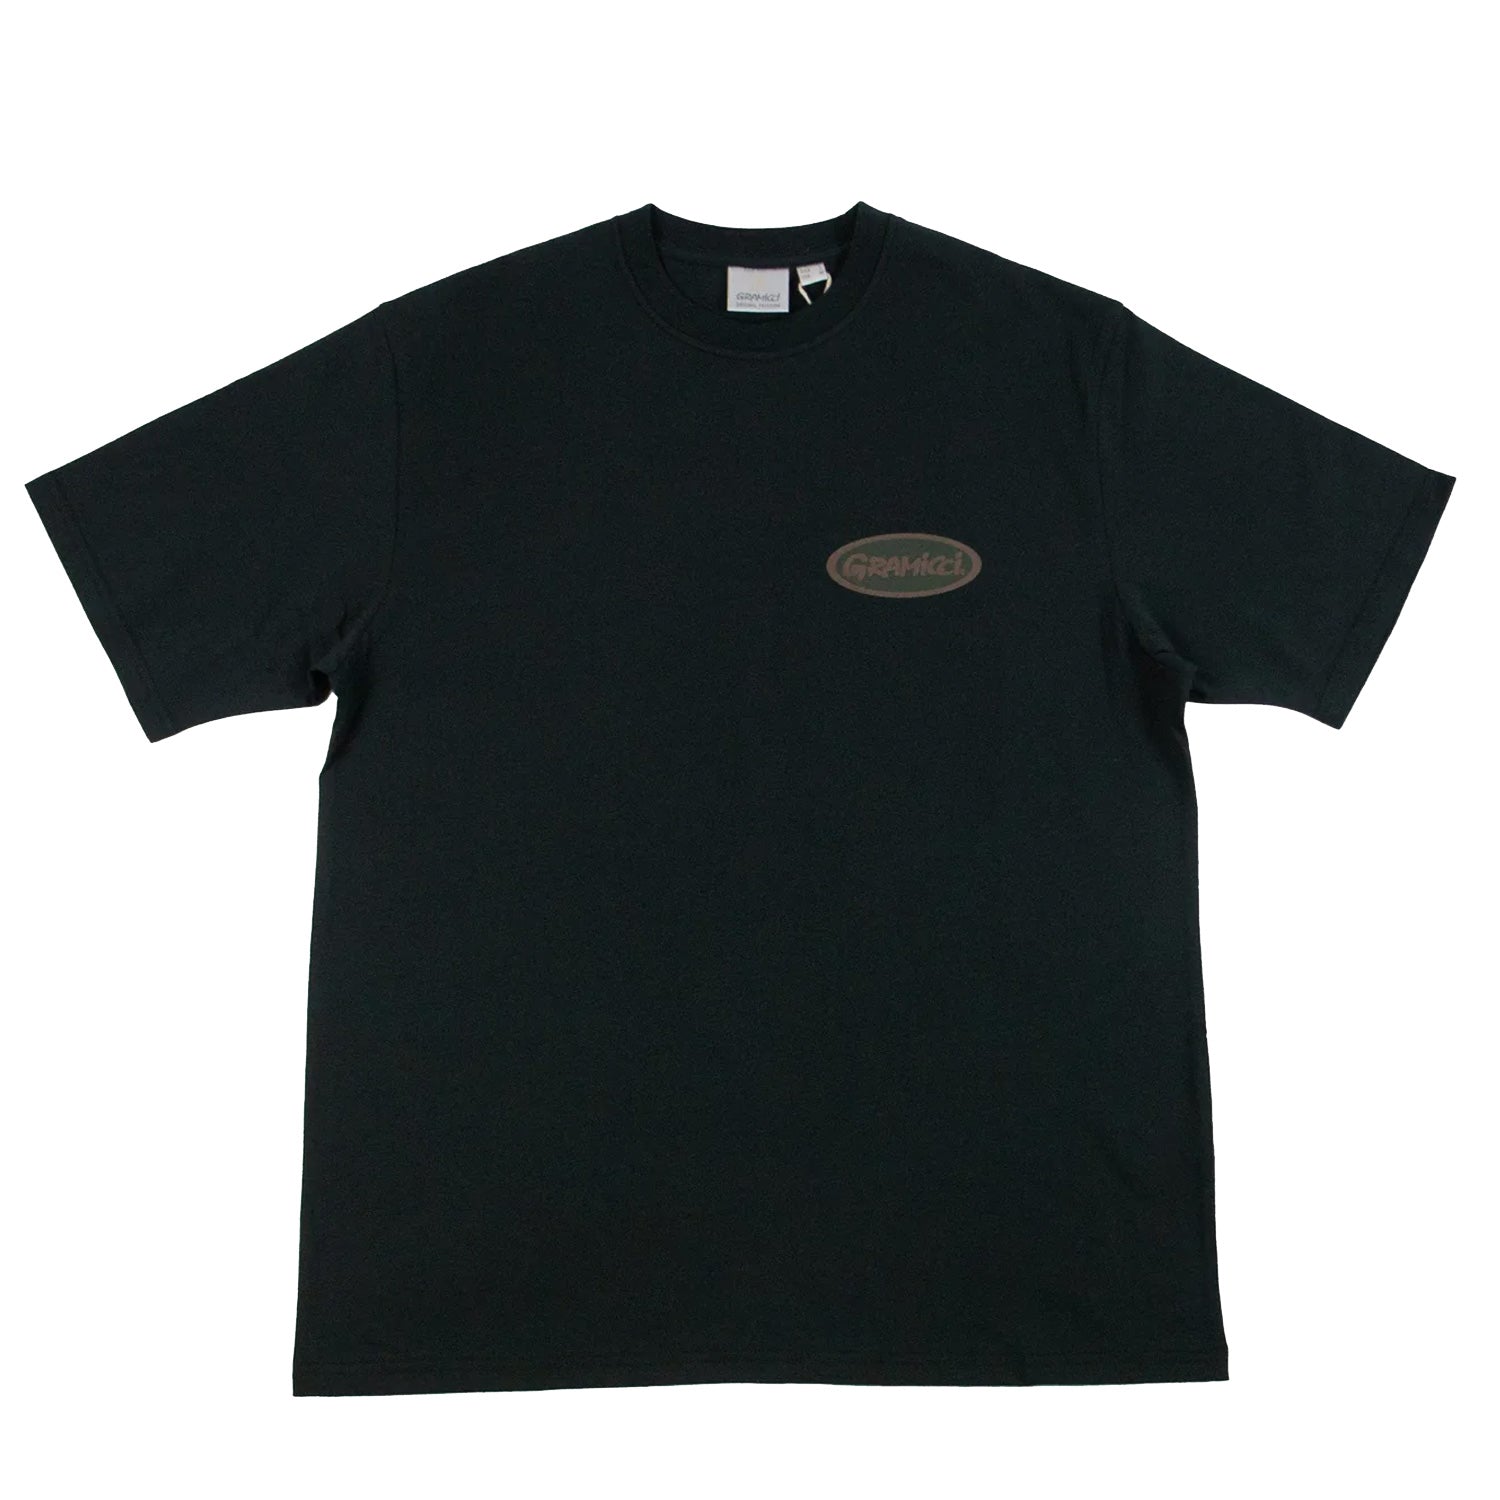 Black short sleeve gramicci T-shirt with oval green and bronze logo on front and back. Free uk shipping over £50